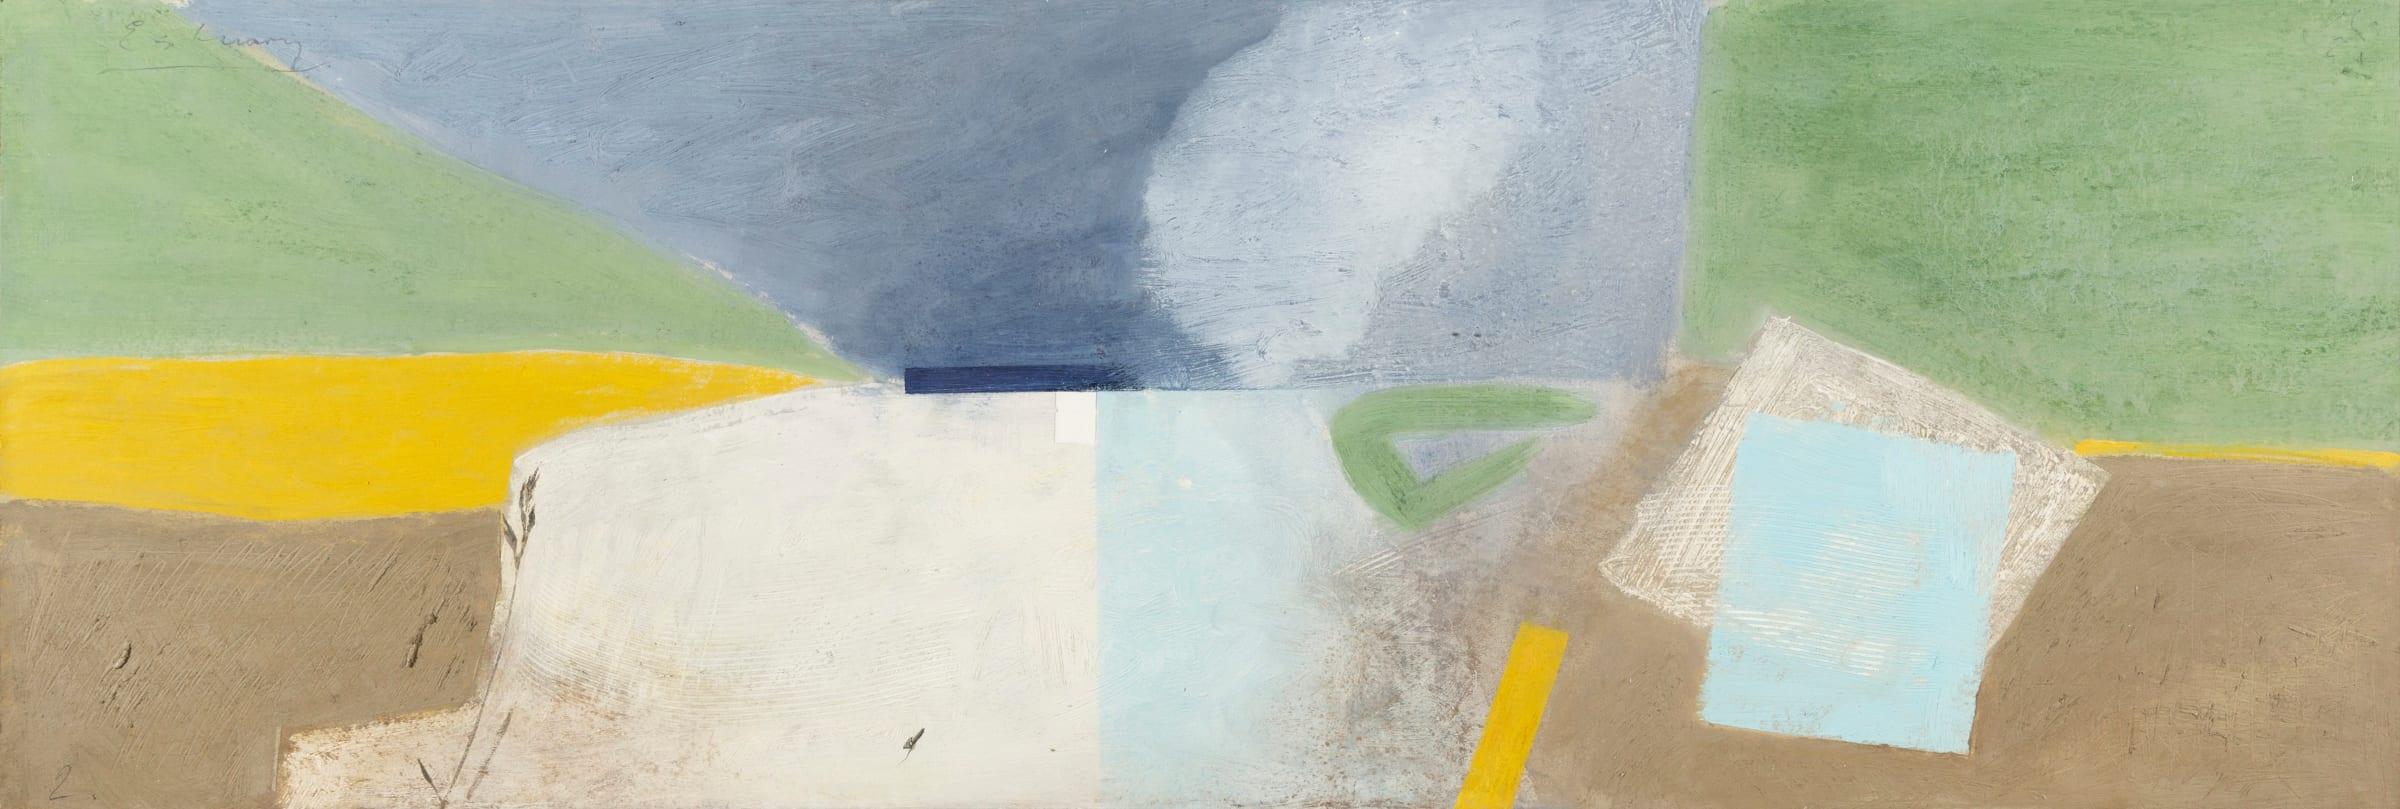 Estuary, Oil on Panel Painting by Keith Purser B. 1944, 2021

Additional information:
Medium: Oil with sand on panel
Dimensions: 38 x 109 cm
15 x 42 7/8 in
Signed, titled and dated

Keith Purser lives and works on the edge of the desert-like